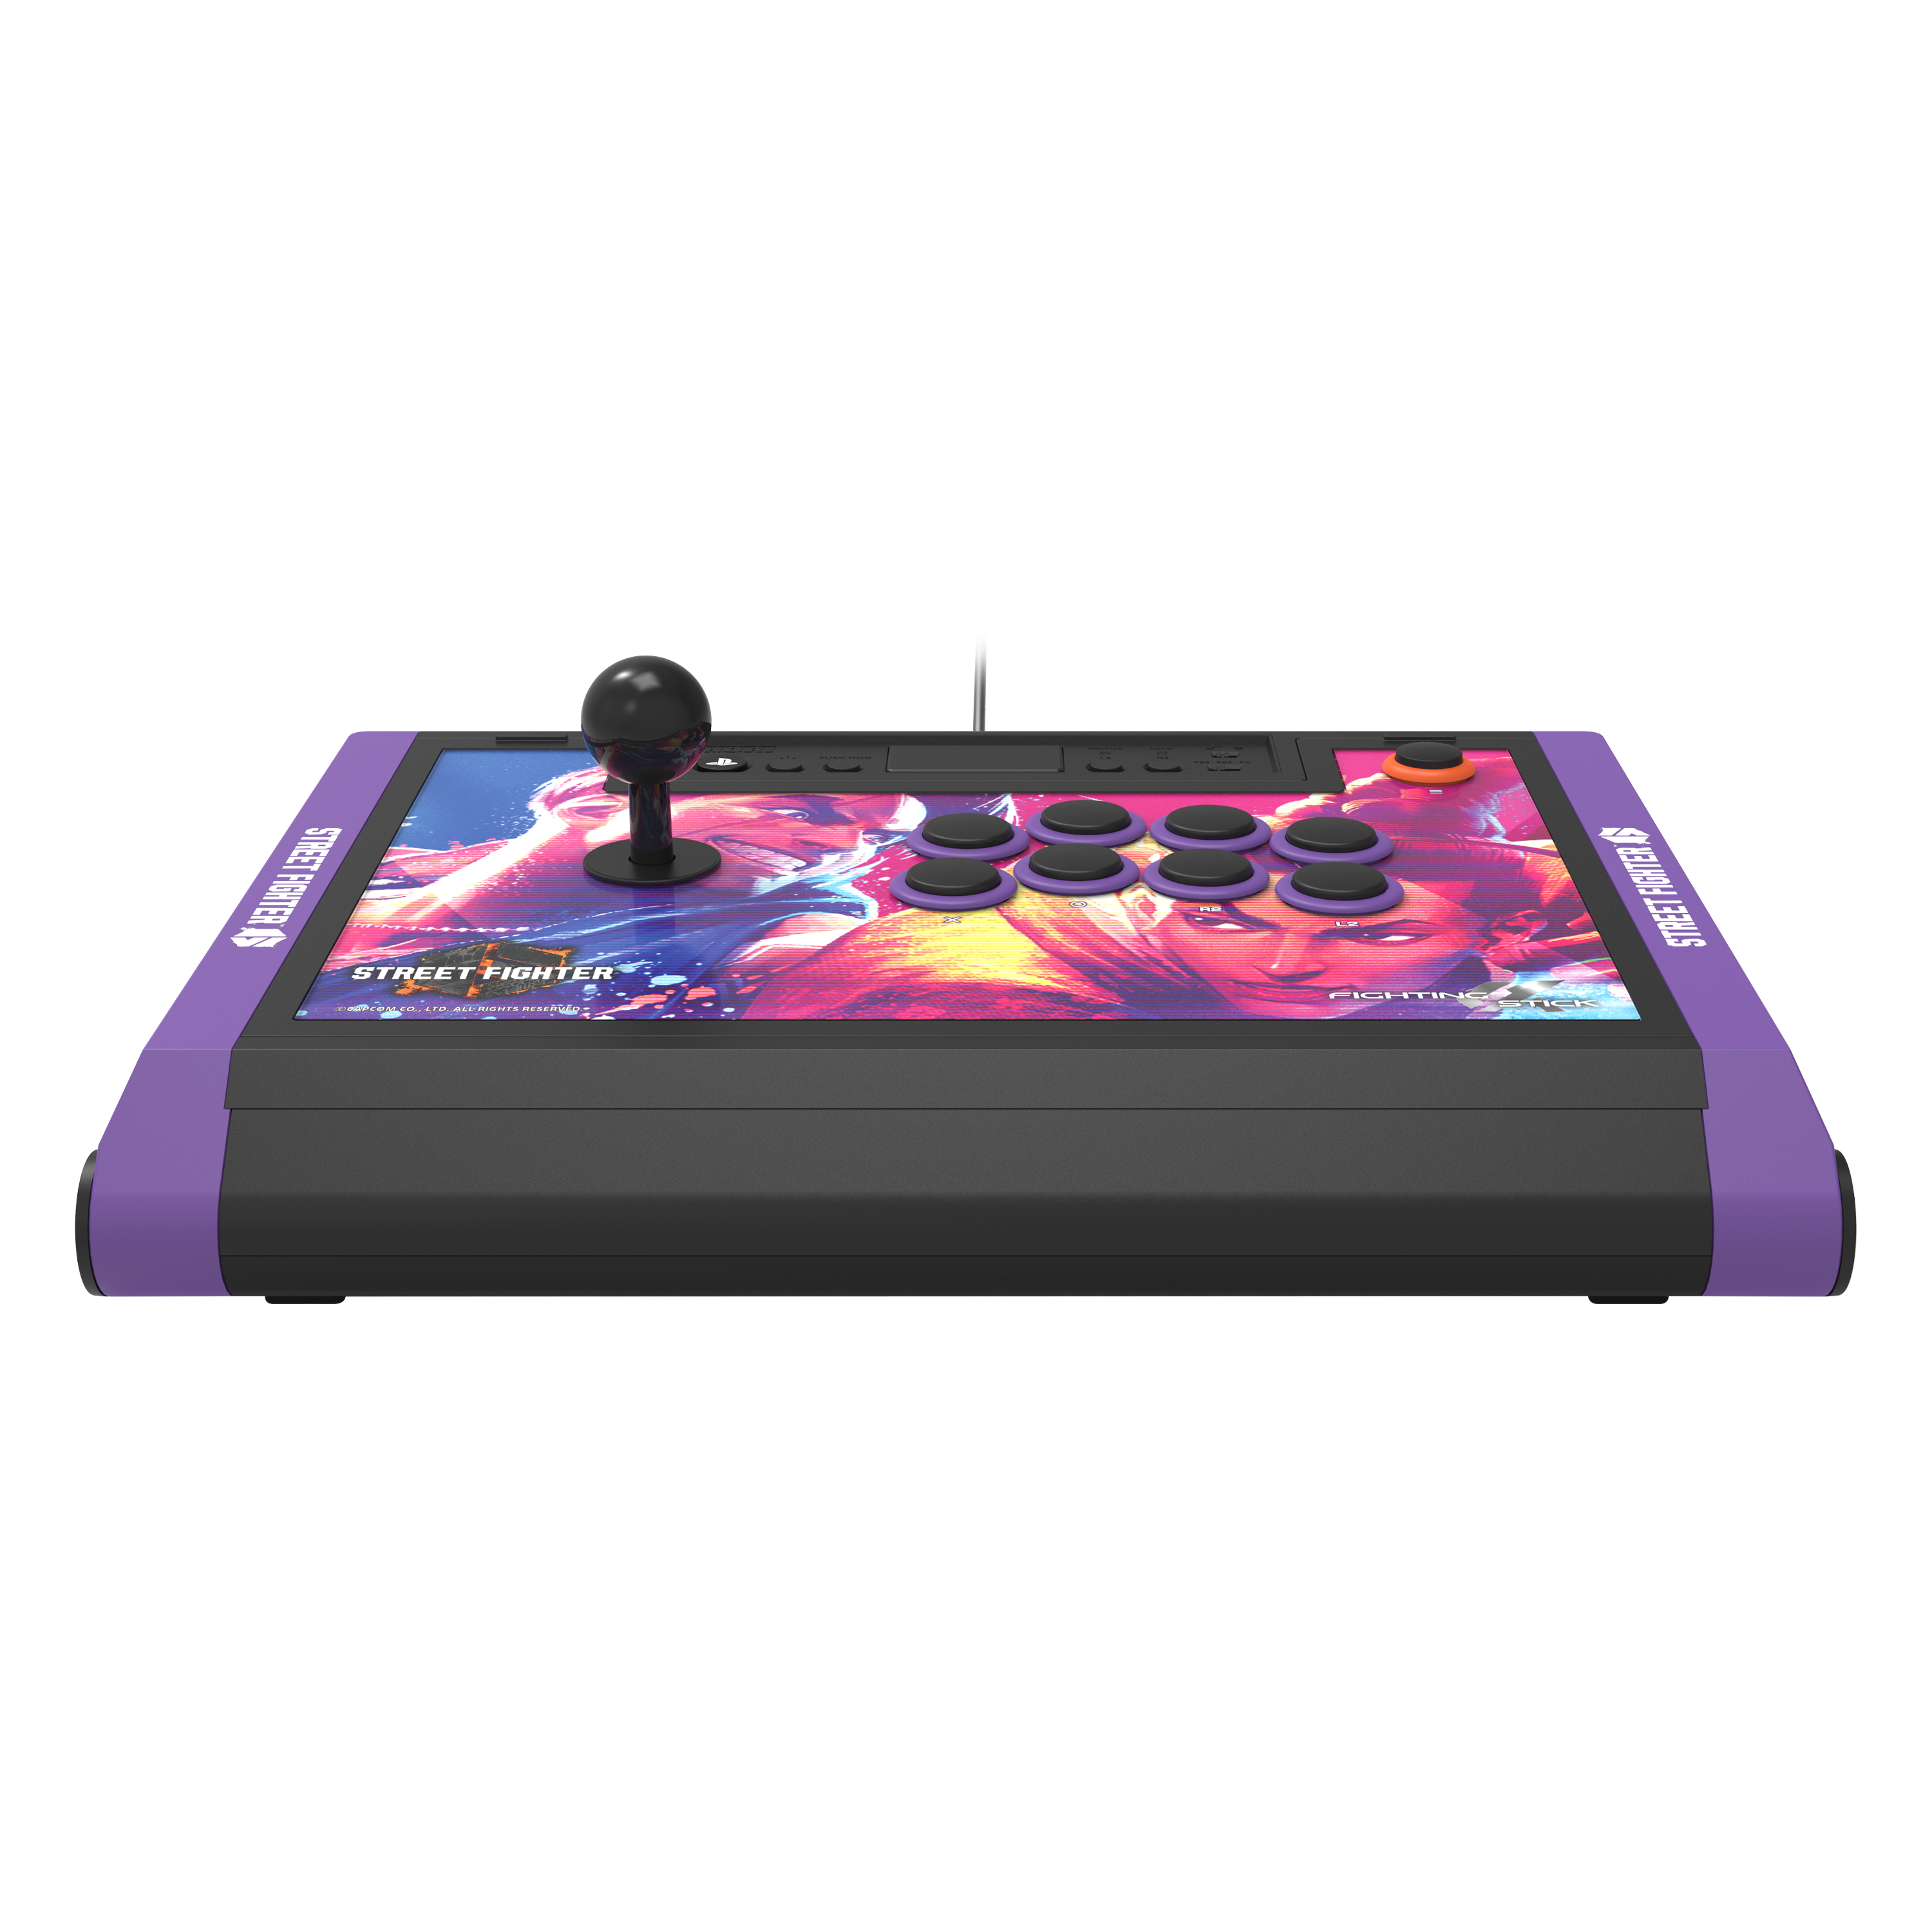 HORI USA on X: It's official! Fighting Stick α Street Fighter™ 6 for  PlayStation®5, PlayStation®4 & PC hits the streets June 2nd. Includes  downloadable panel art of all 18 main roster fighters! @